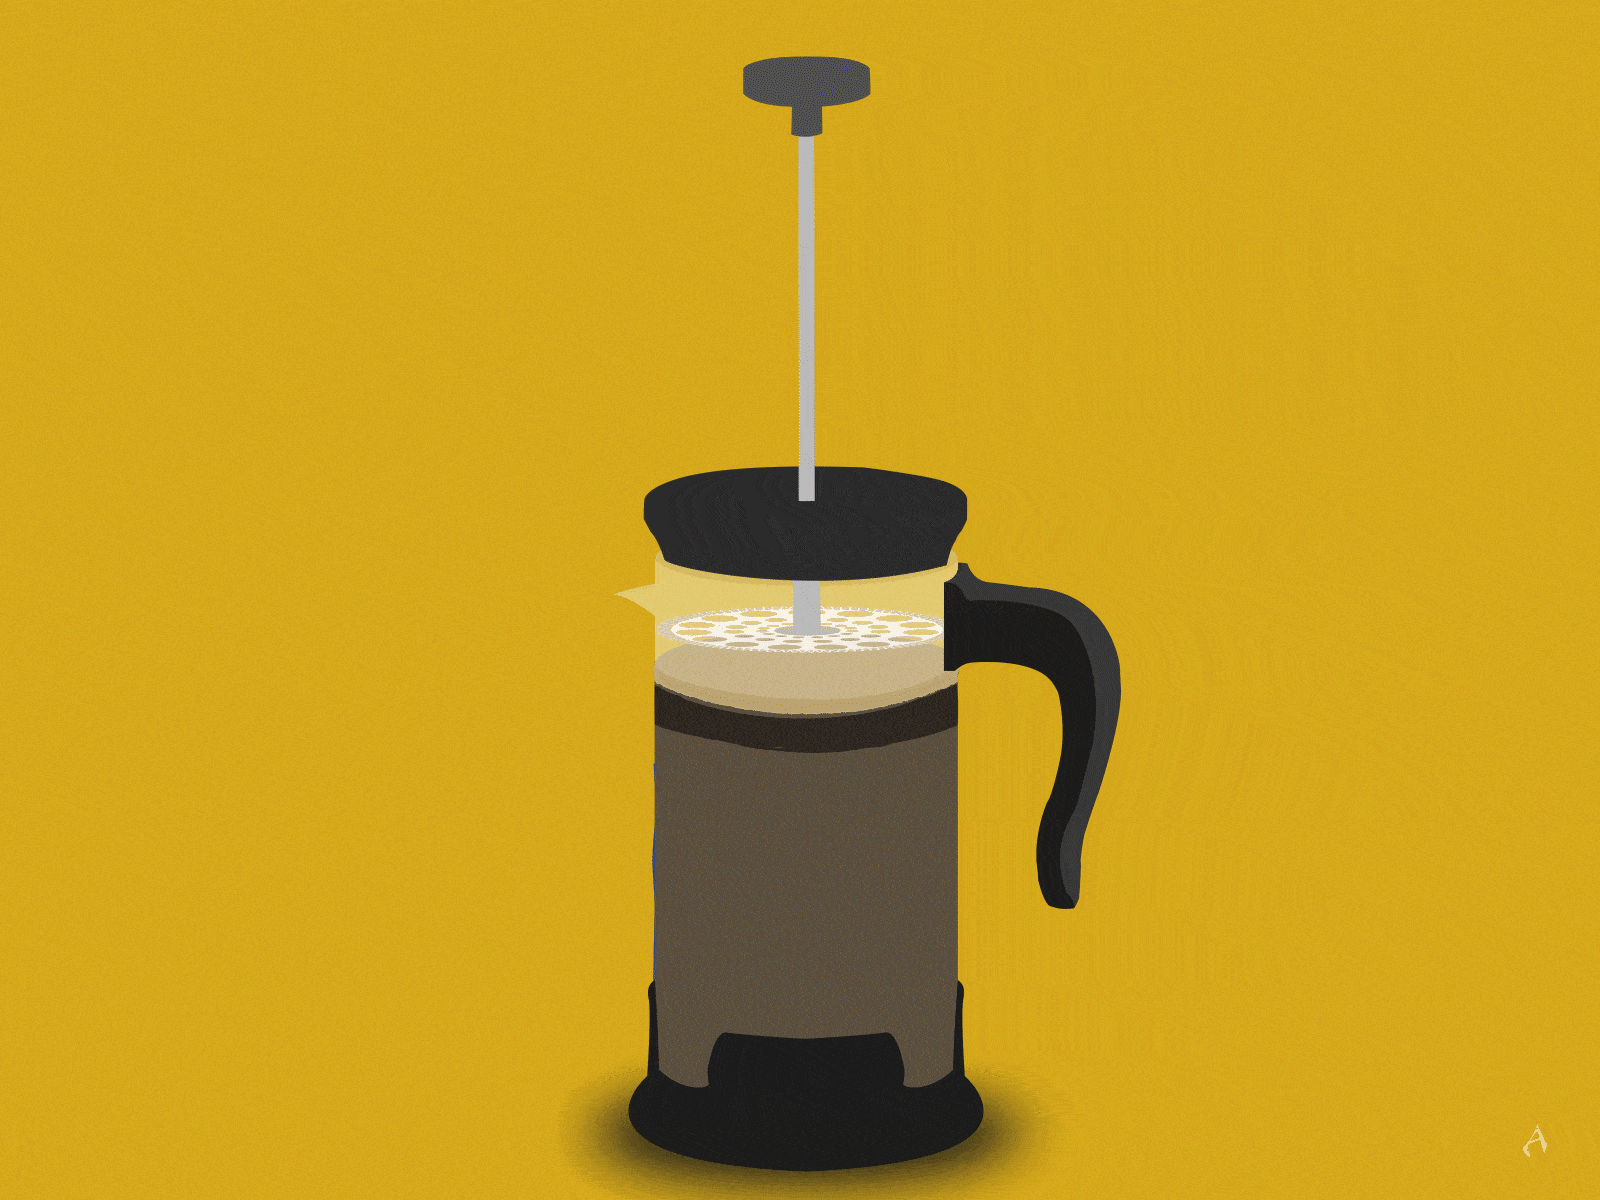 Space Coffee French Press | Motion Graphics | After Effects after effects art beverage coffee coffee pot coffeebeans covfefe cup design drink fluid french press graphicdesign mograph mokapot motion graphics plunge robusta space water